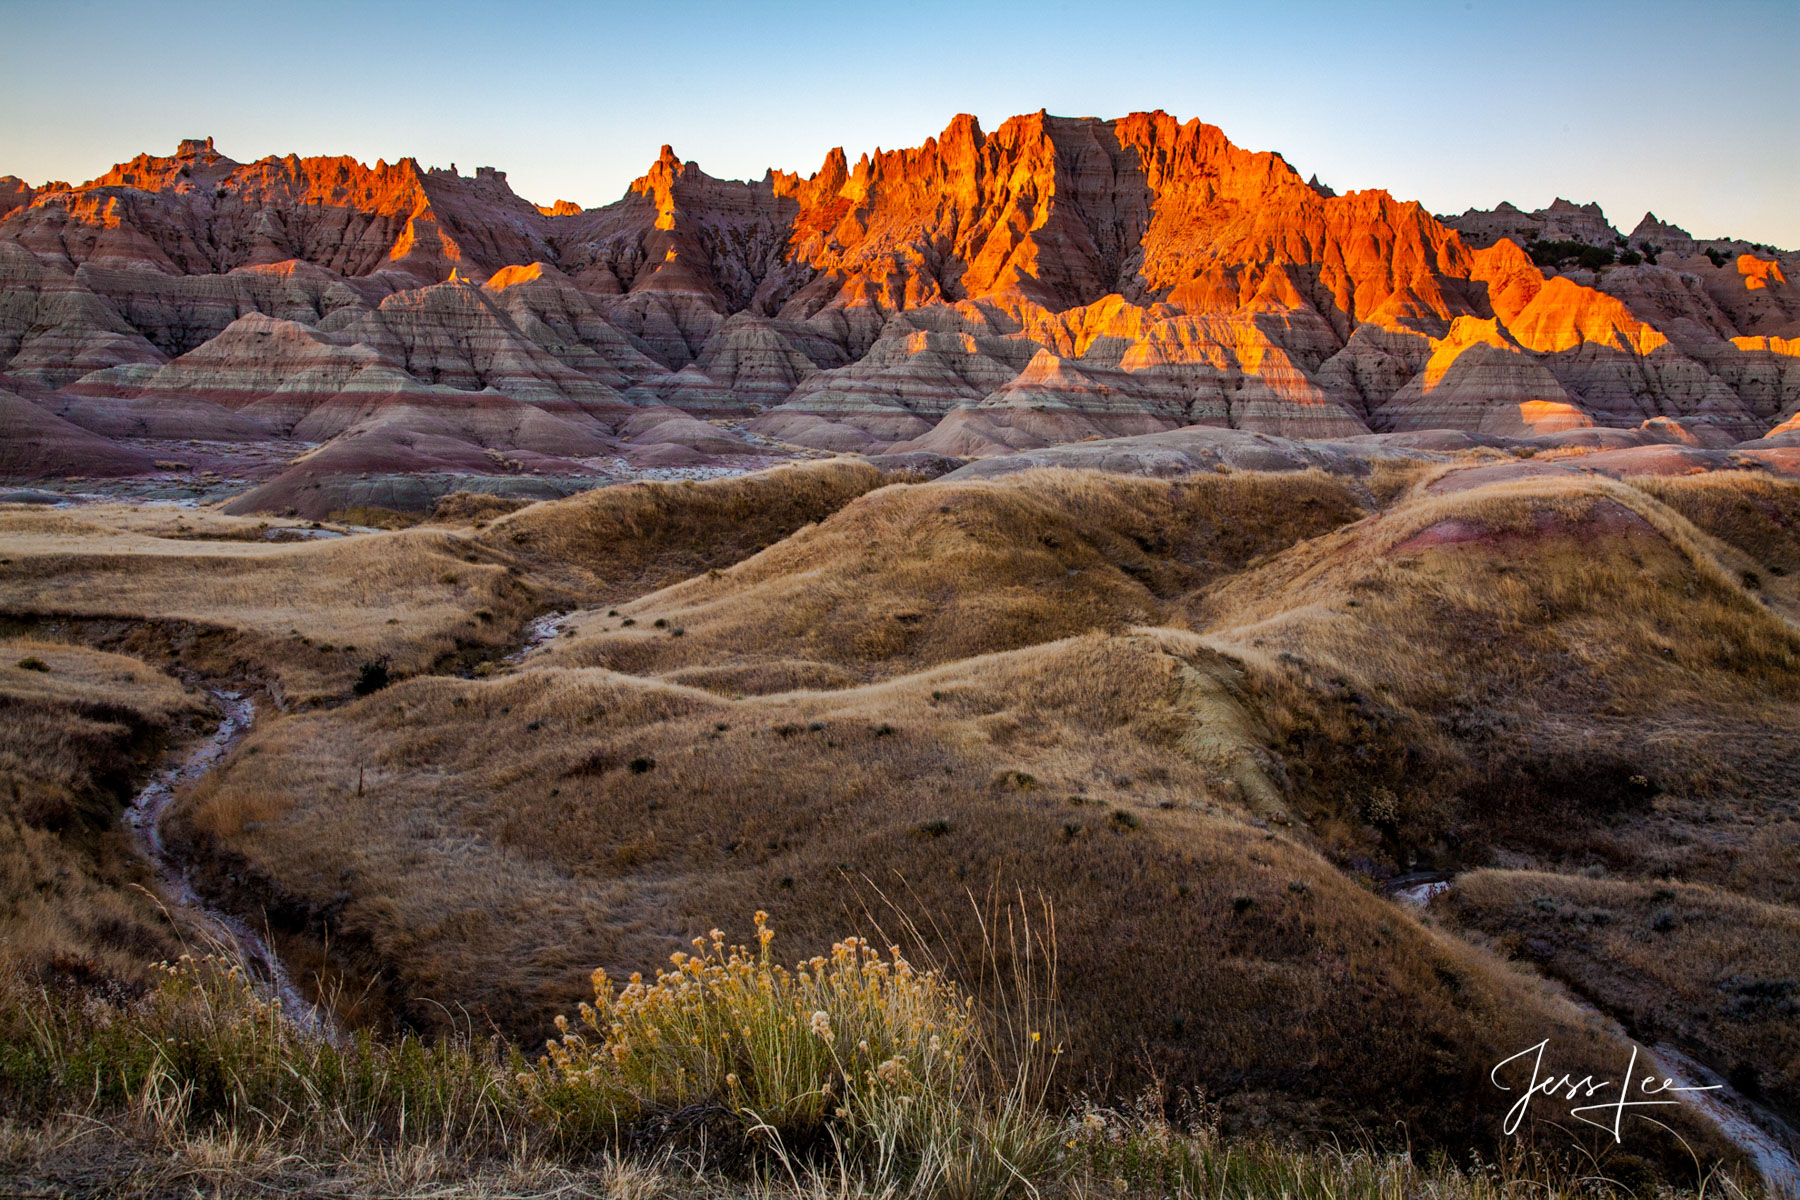 Limited Edition of 50 Exclusive high-resolution Museum Quality Fine Art Prints of the Badlands. Photos copyright © Jess Lee